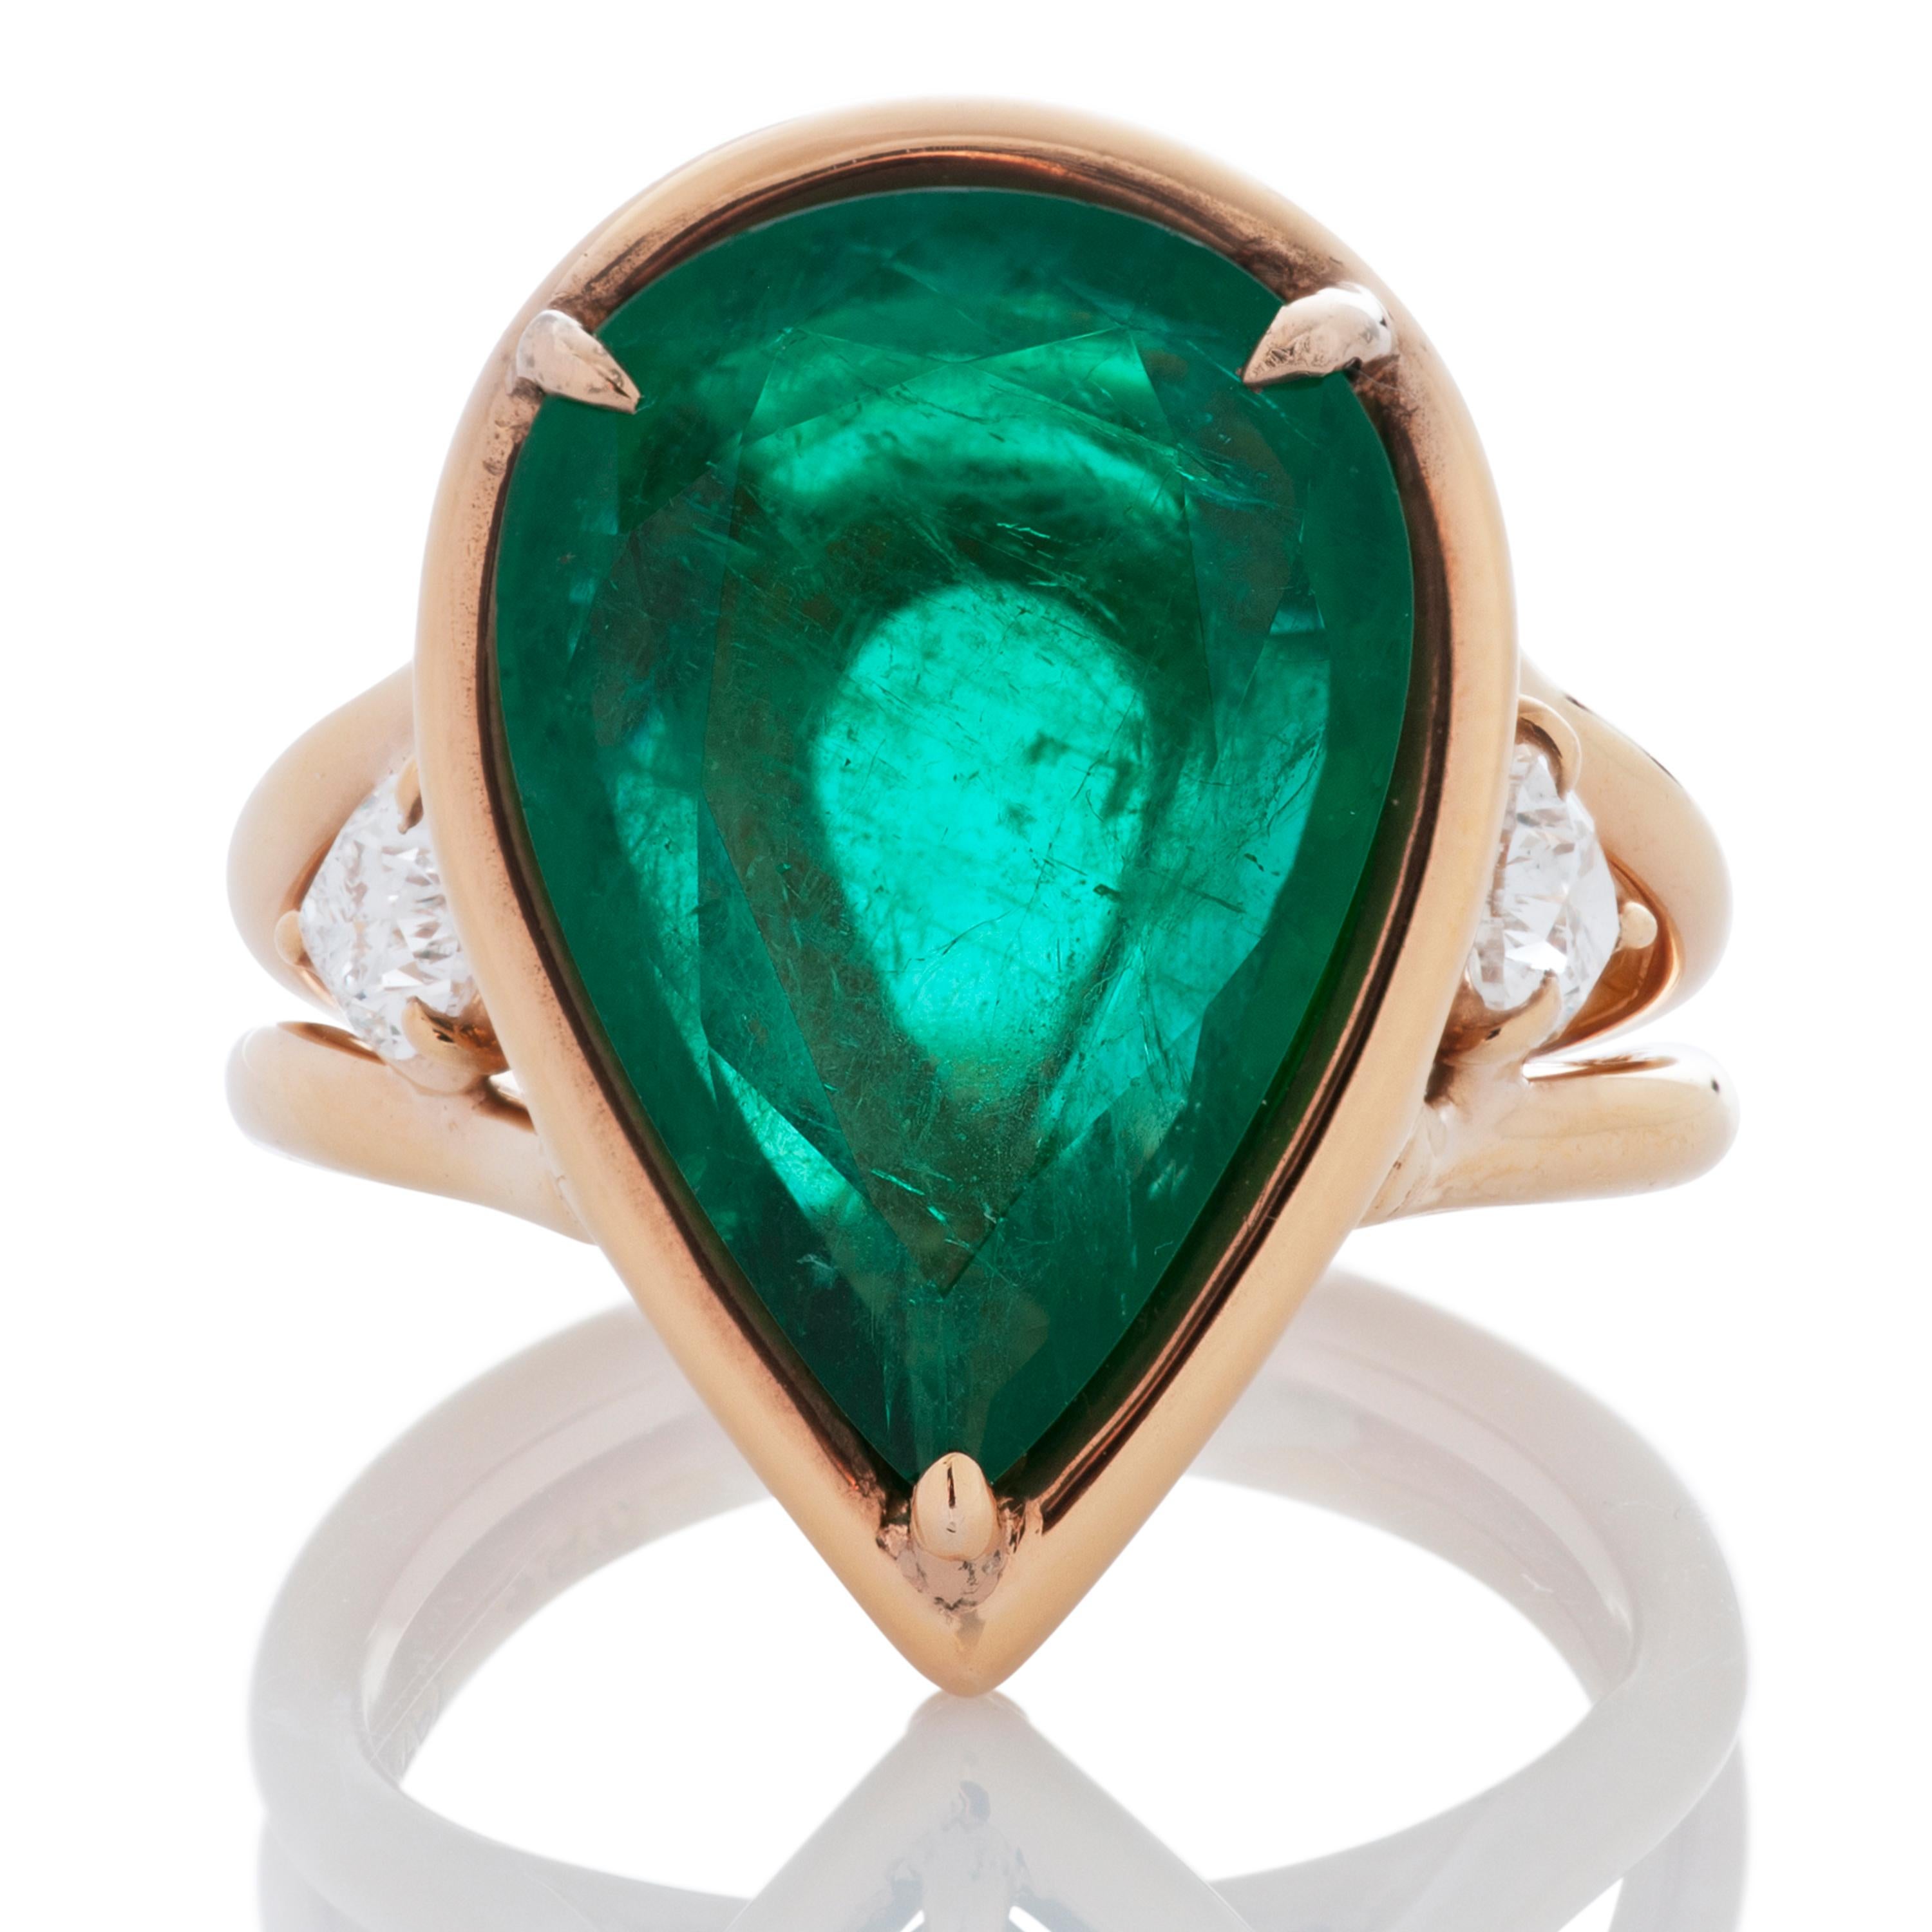 Robert Procop emerald and diamond ring in 18k rose gold.  The center stone is a 6.59 carat pear shaped Zambian emerald accompanied by a C. Dunaigre report.  The emerald is accented by 2 pear shaped diamonds totaling 0.56 carat with estimated H-I